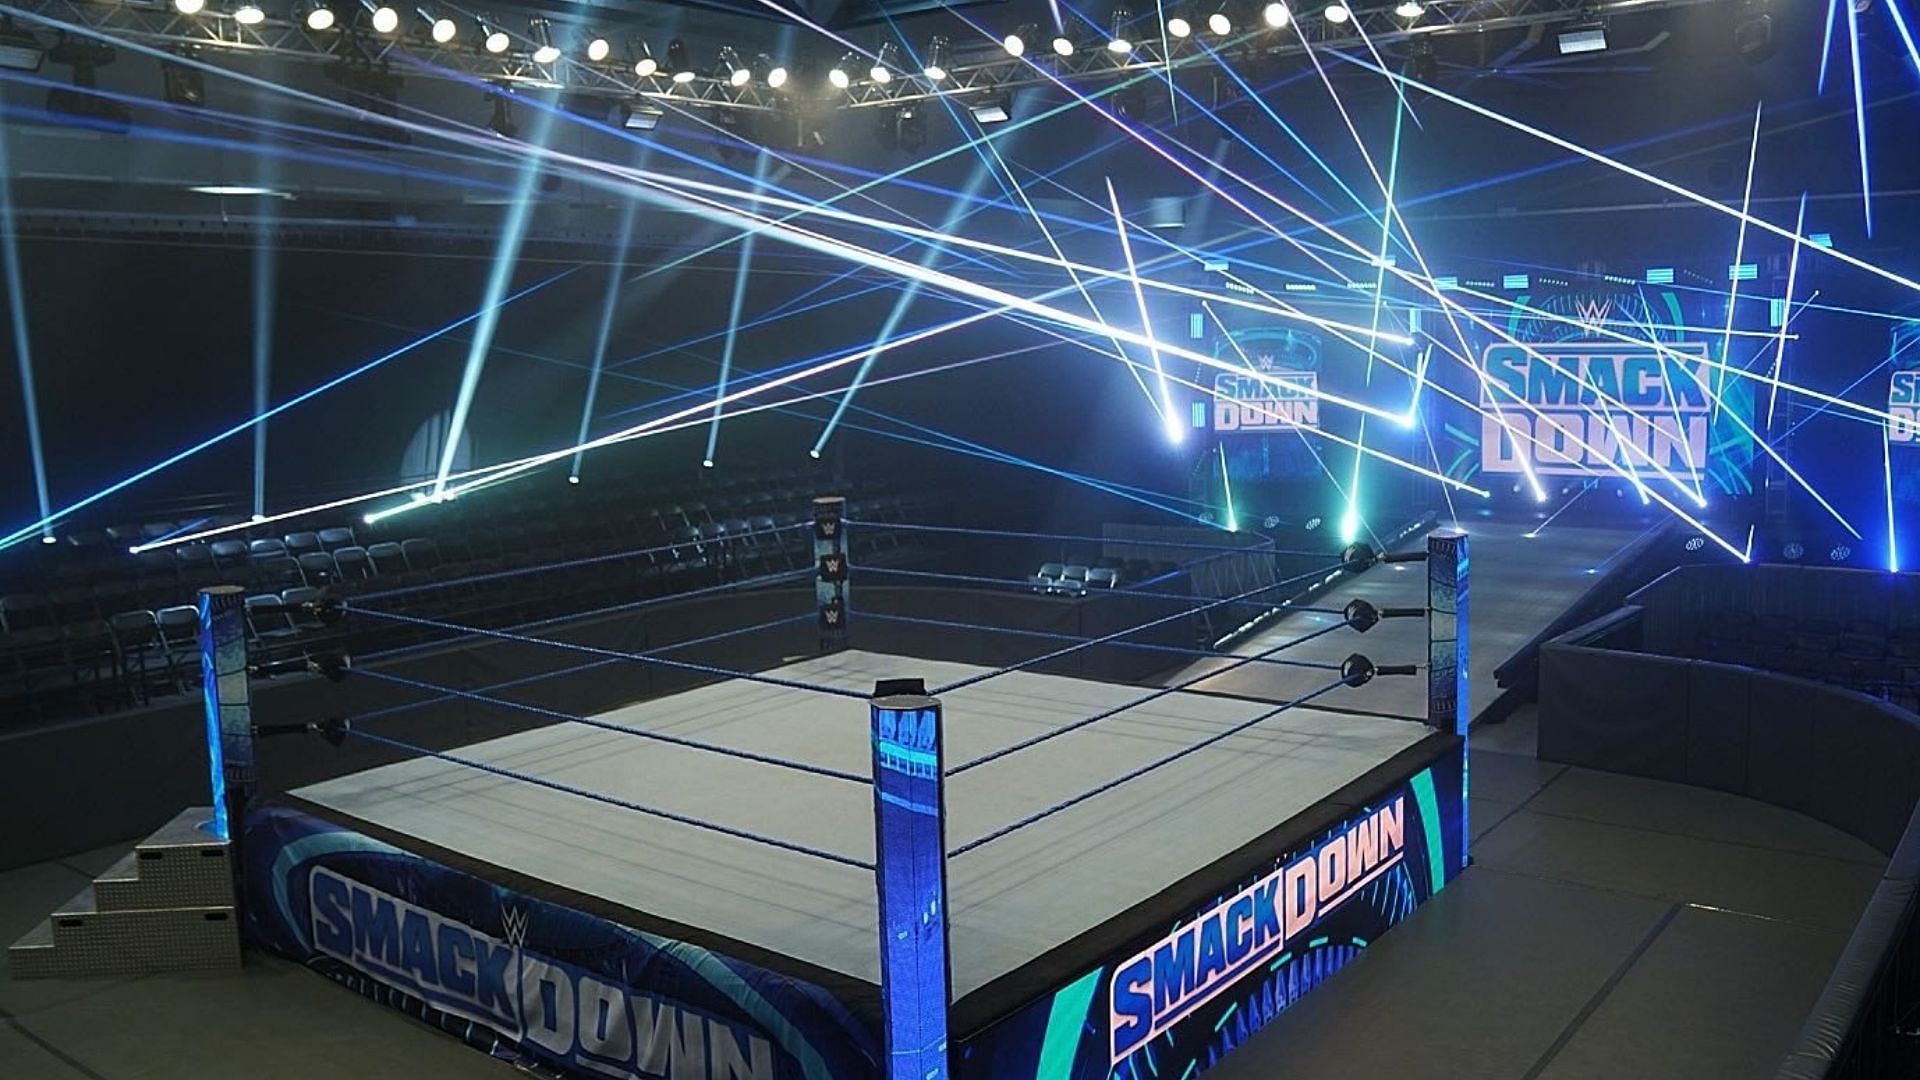 WWE SmackDown arena. Image Credits: Twitter - @froggneal